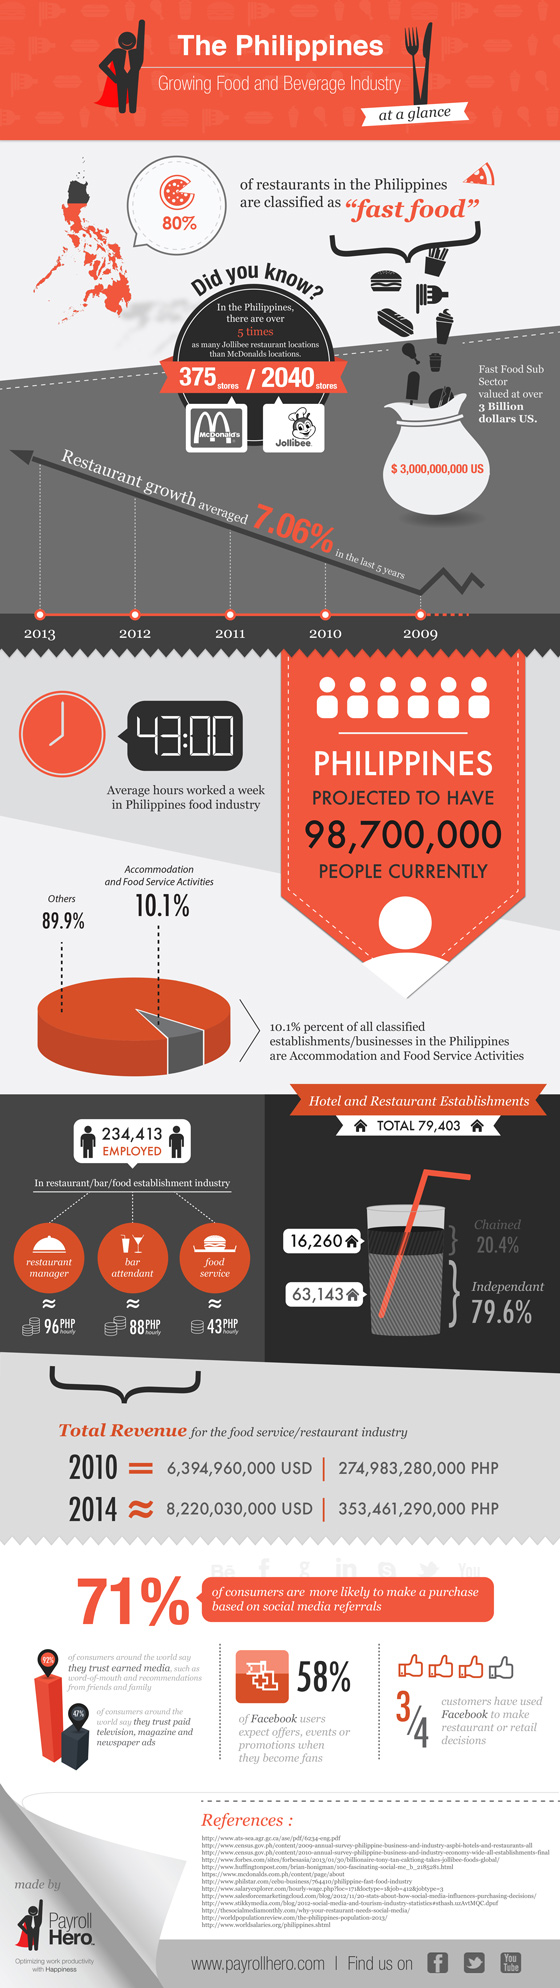 The Philippines Restaurant Industry at a Glance